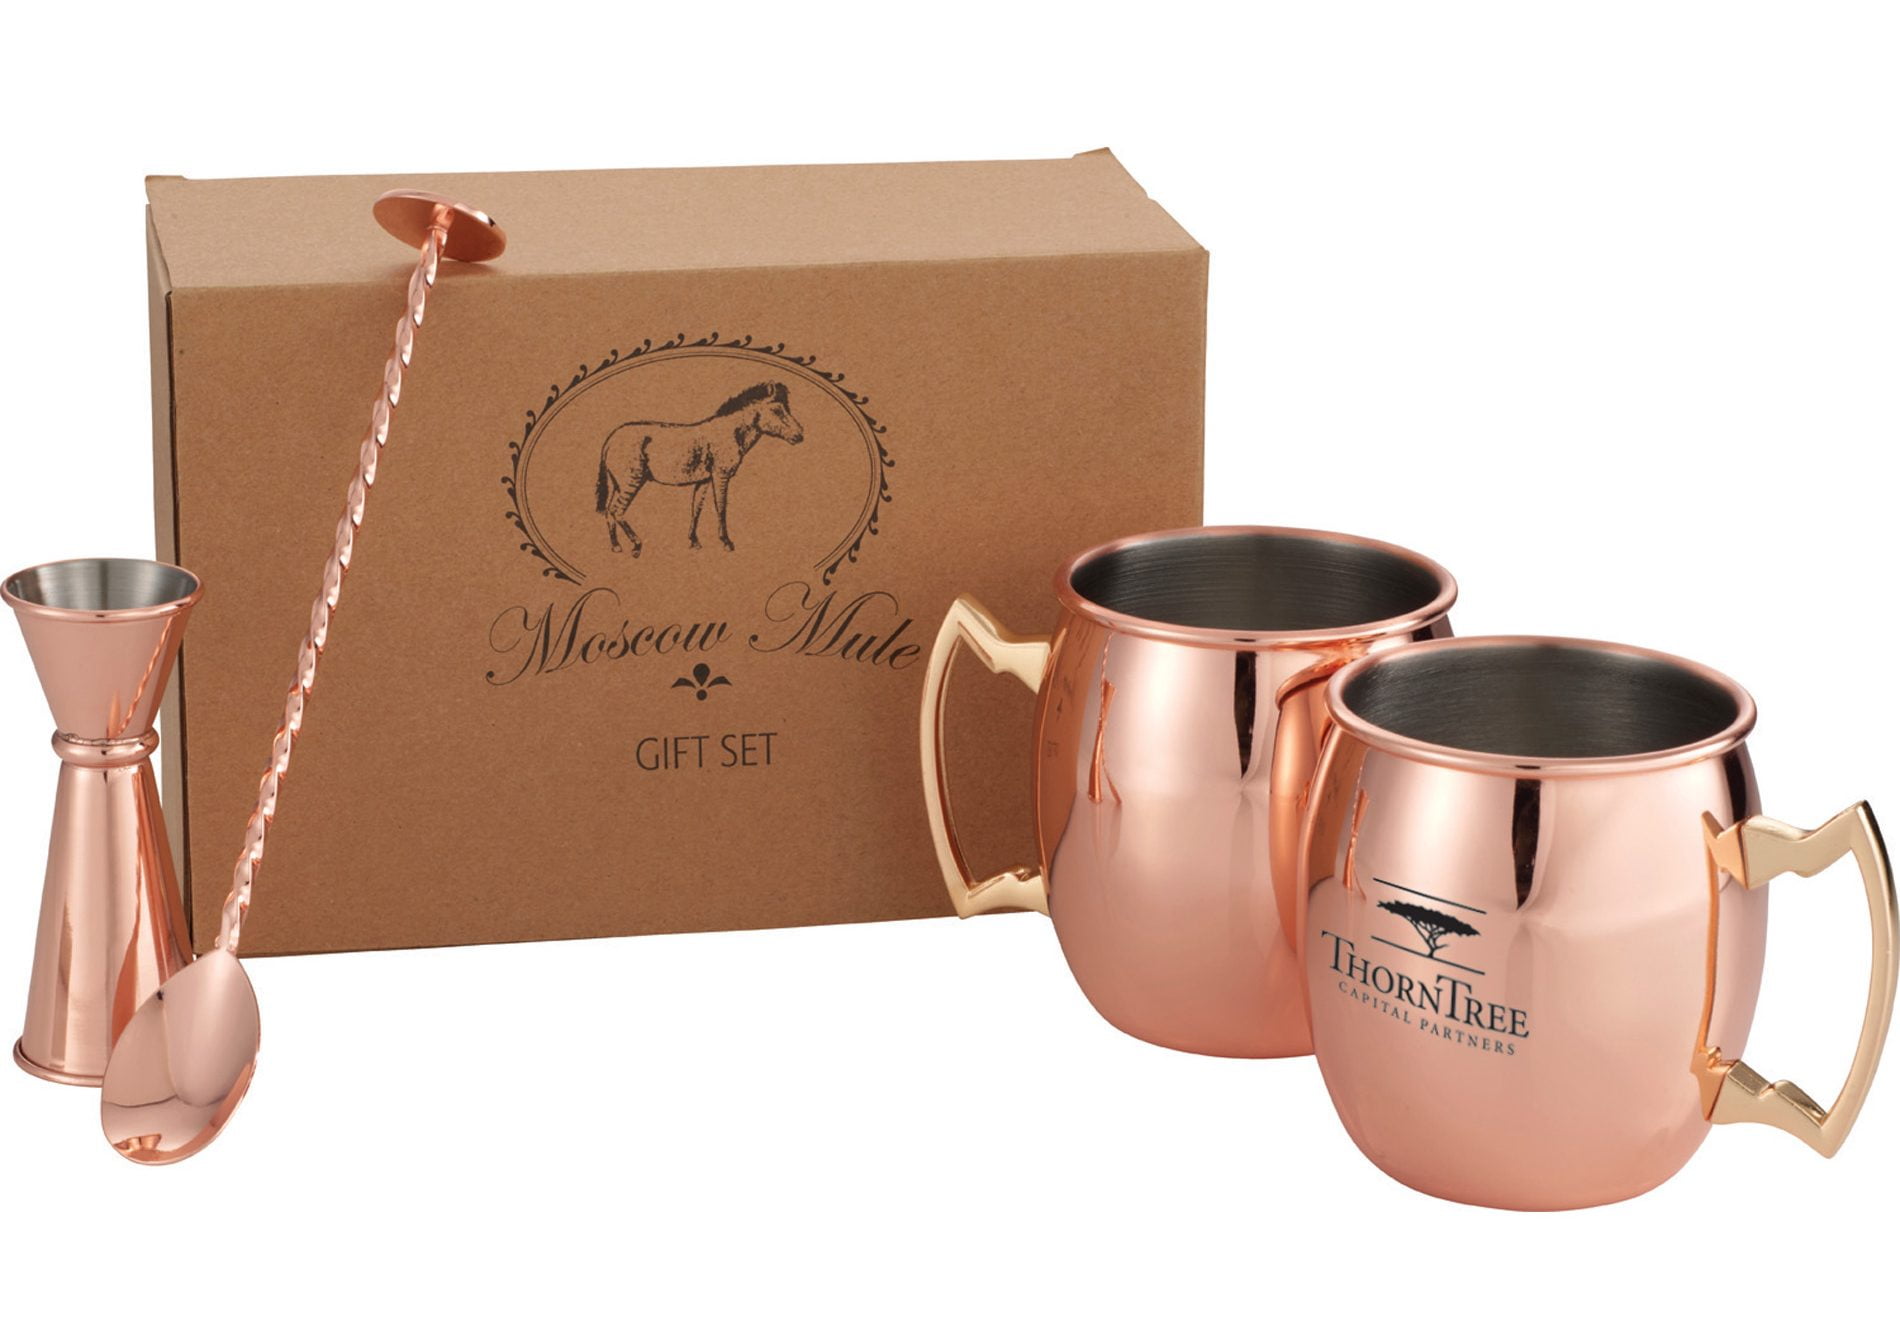 Moscow Mule 4 in 1 Gift Set MSP Custom Solutions